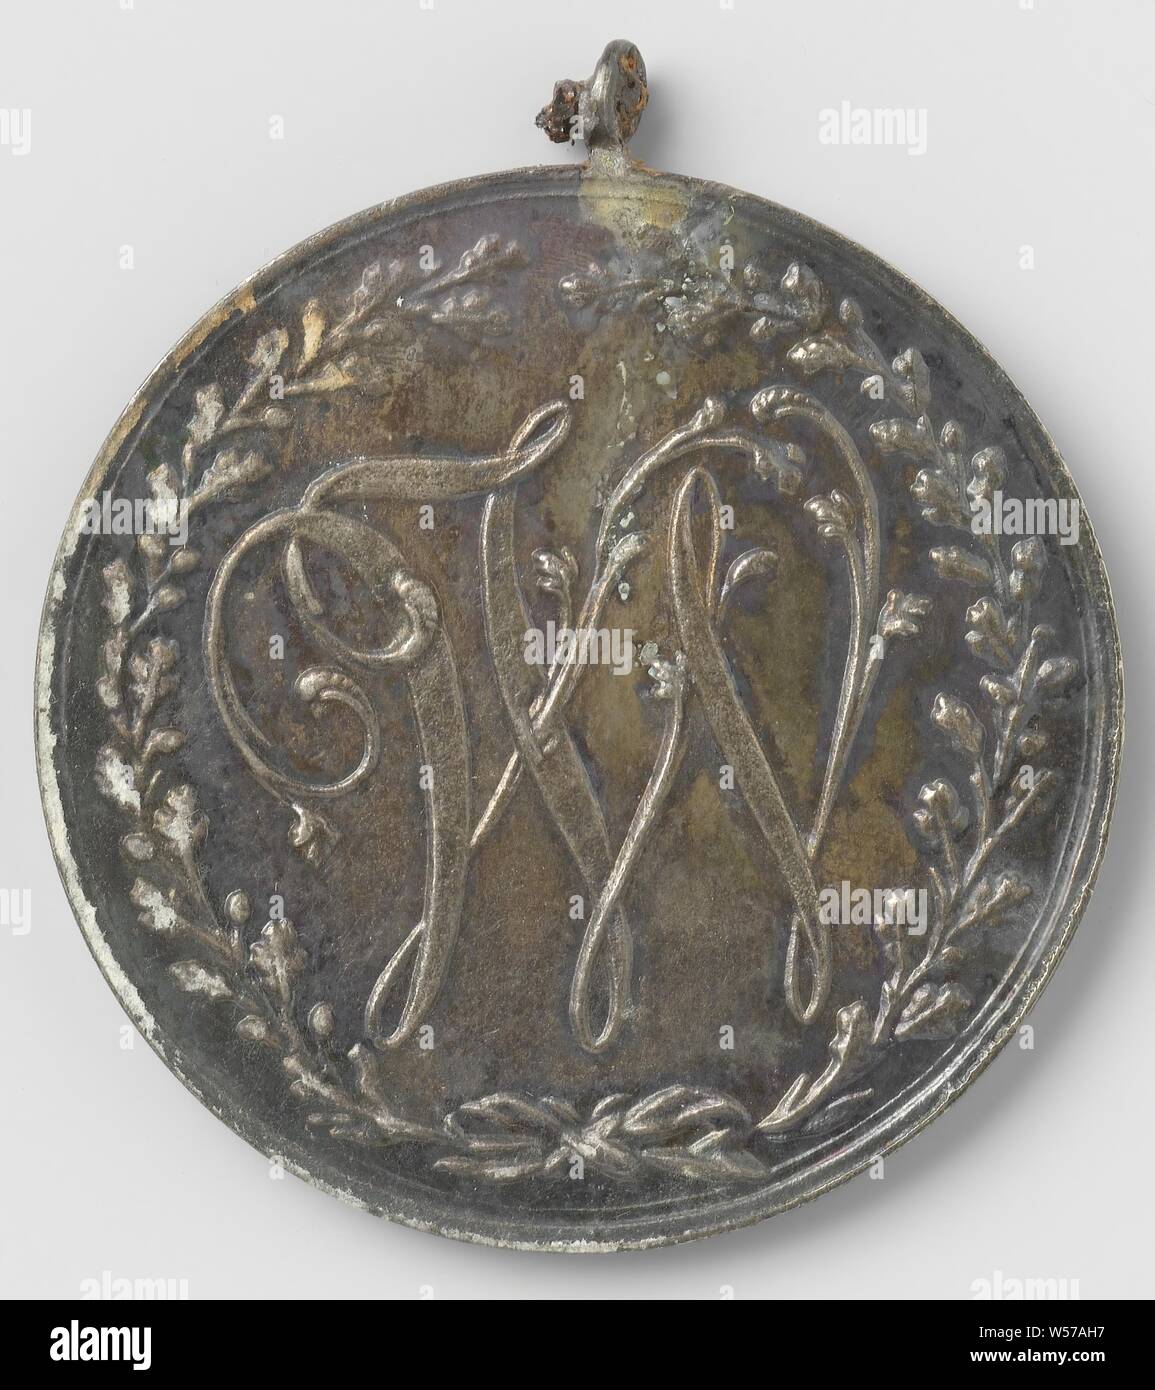 Society promoting art and science under the phrase 'Progress through Science', medal by the Department of Drawing awarded to D. van Coppenaal, Silver medal on the eyebolt and broken support ring. Front: letters V and W within oak wreath. Reverse: inscription within laurel wreath, Amsterdam, D. van Coppenaal, Progress through Science, Hendrik de Heus, 1830, silver (metal), engraving, d 3.4 cm × d 3 cm × w 116 Stock Photo